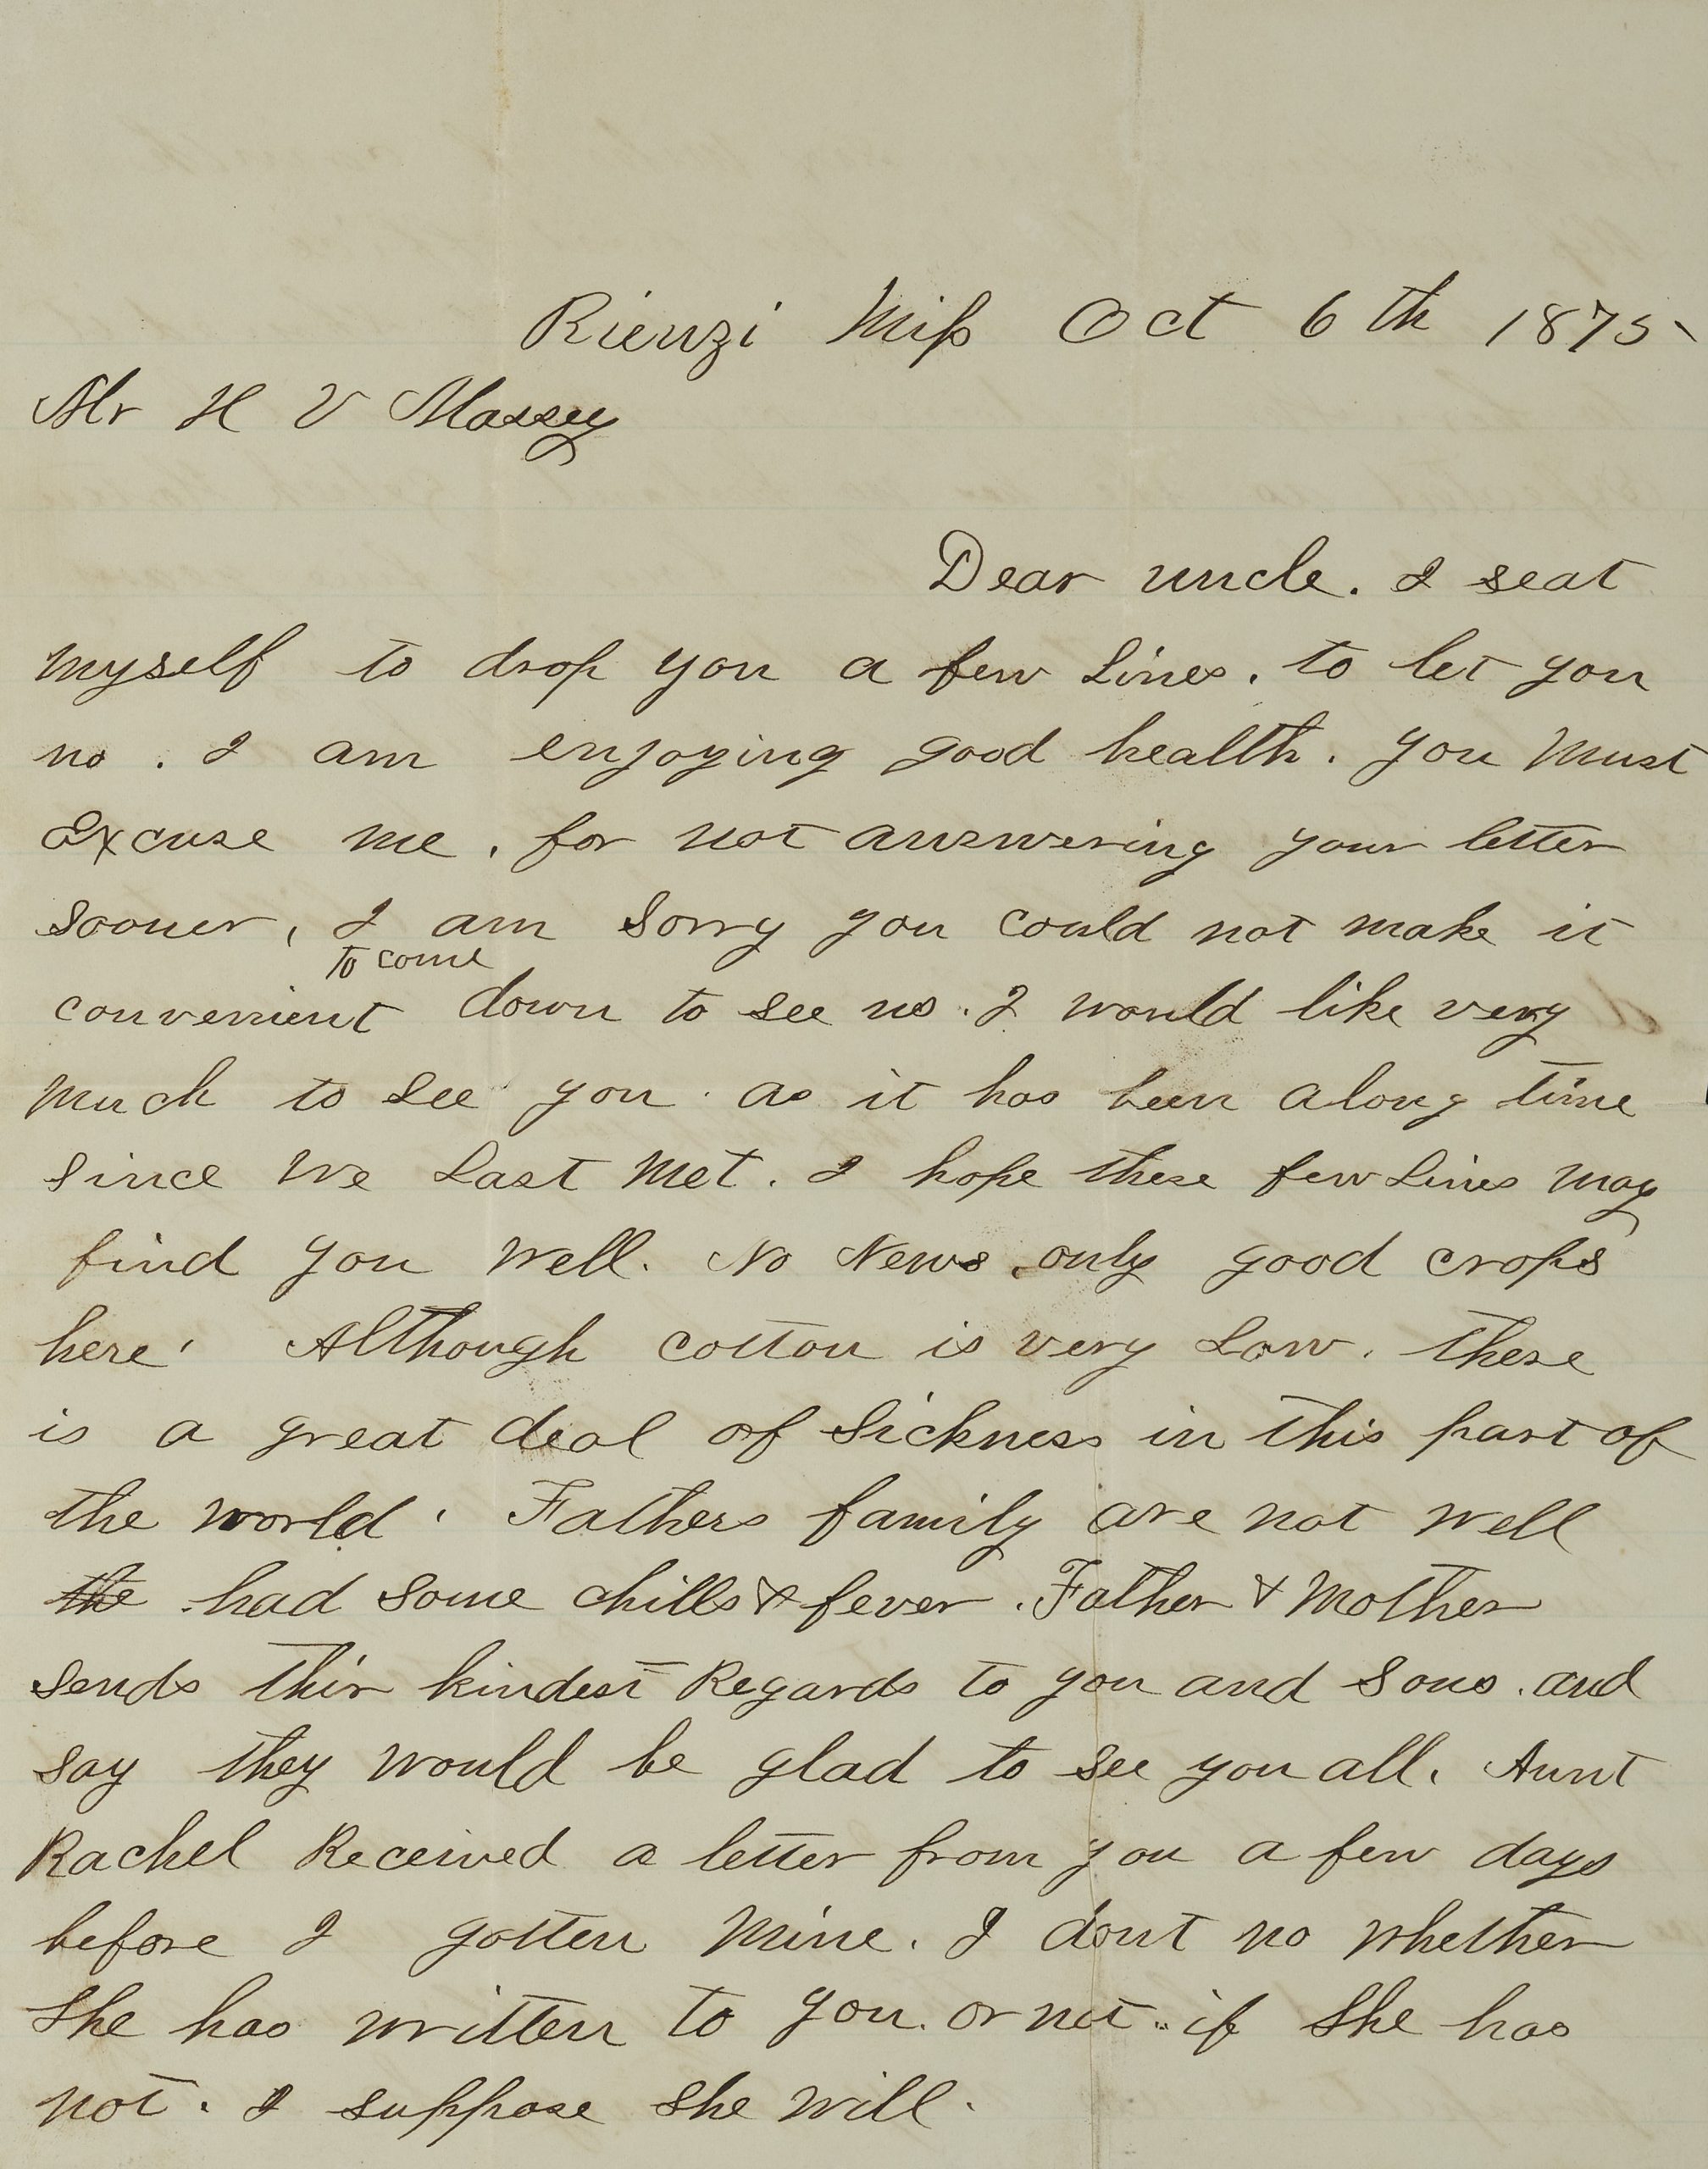 Letter from Oliver M. Perry to Dr. H. V. Massey talking about what's currently going on in his life.